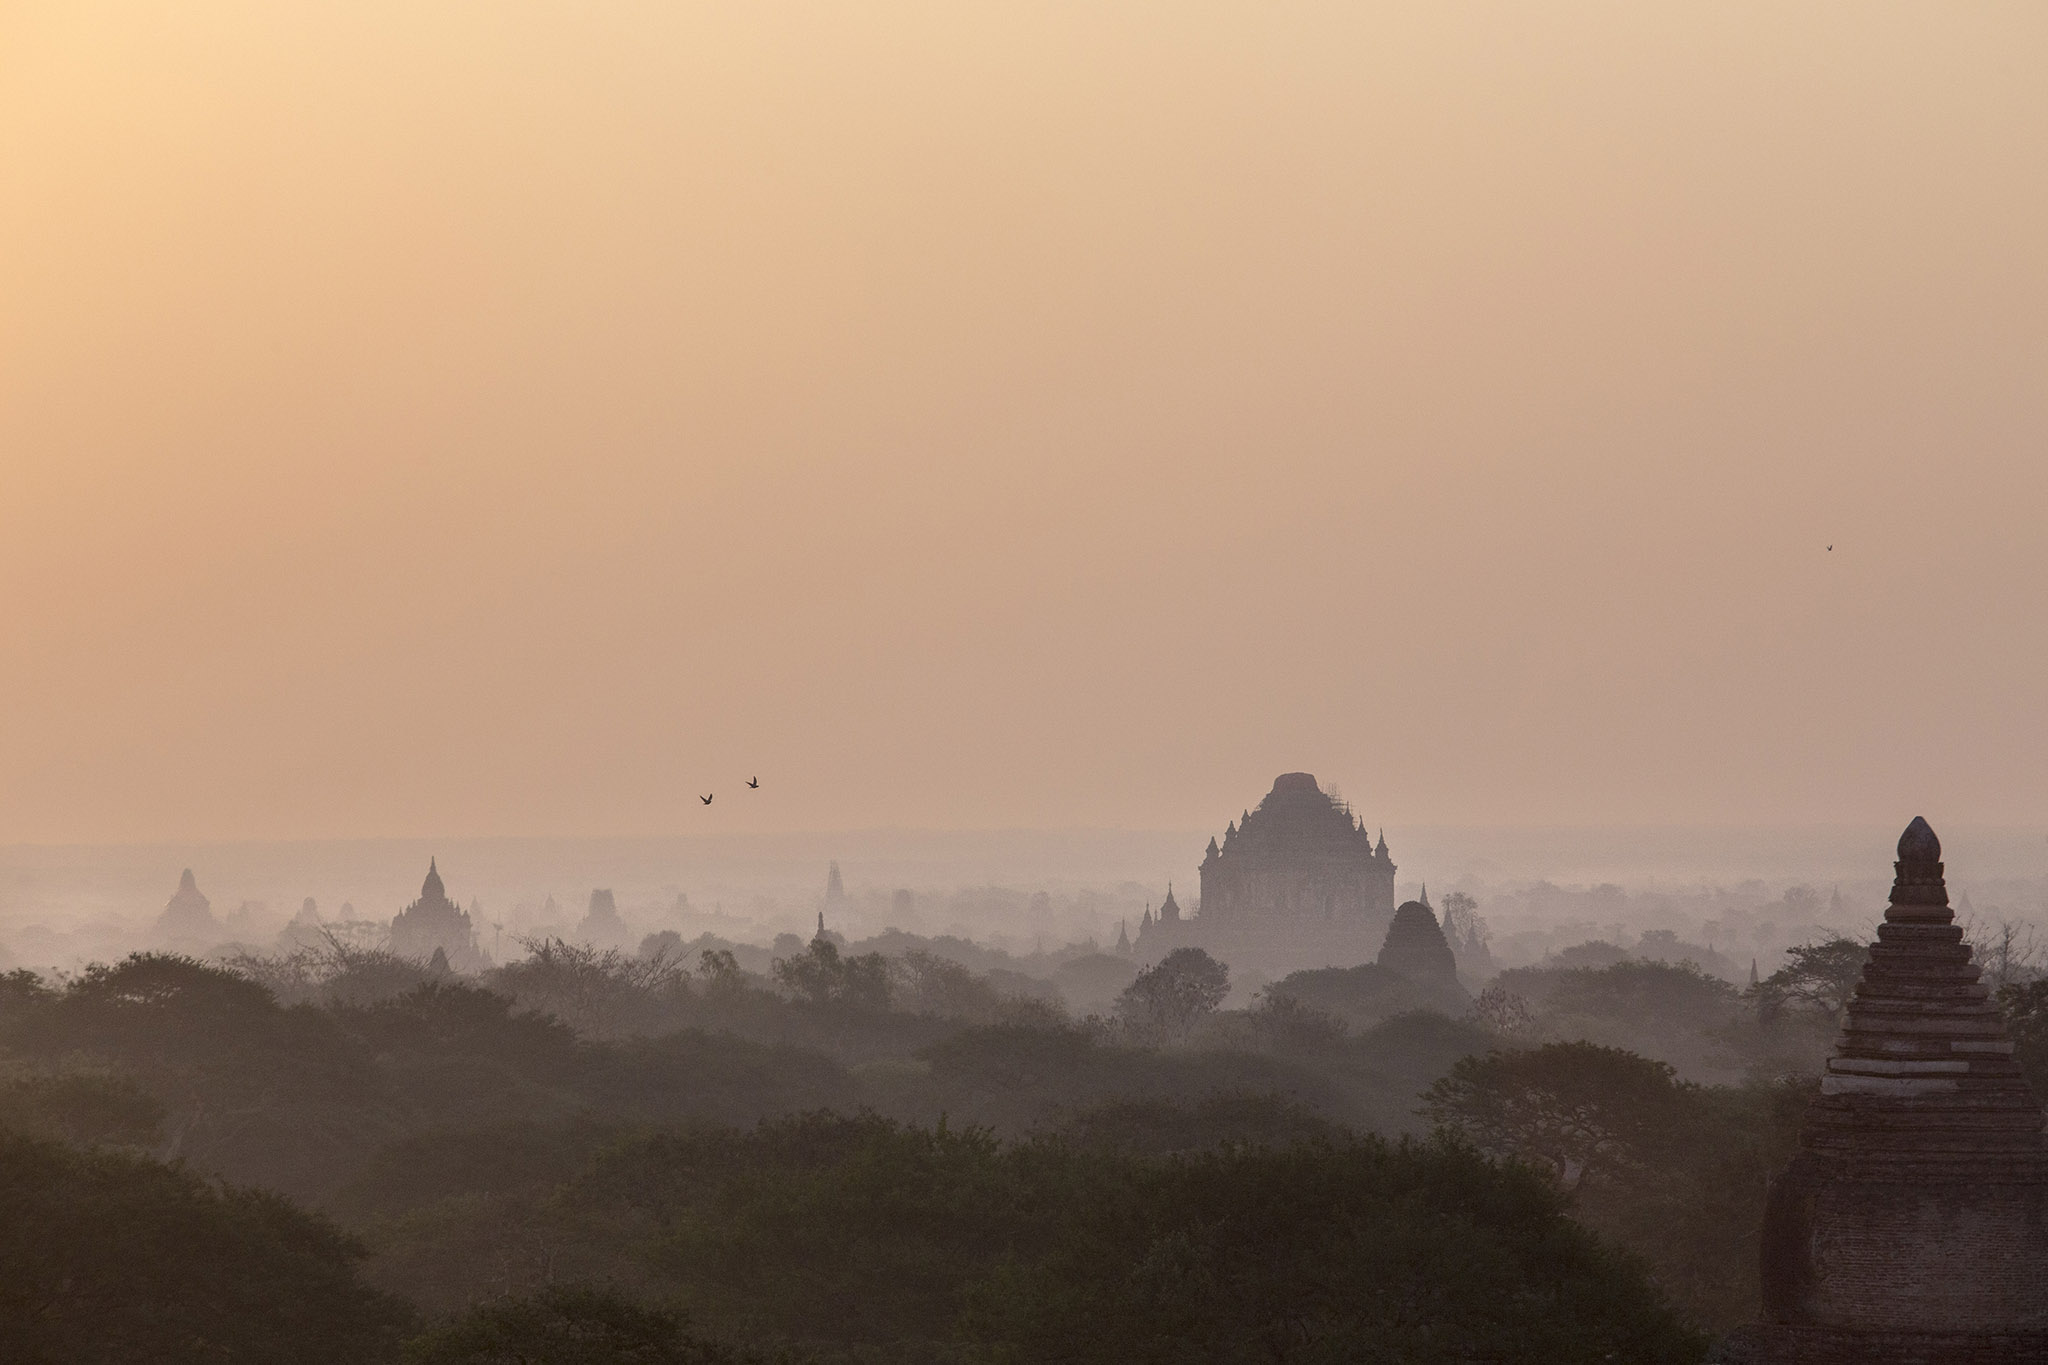 Sunrise over the temples of Bagan, Myanmar, March 15, 2017. The Myanmar government is seeking World Heritage status for Bagan. The bid may succeed because a 2016 earthquake destroyed some earlier restorations. (Minzayar Oo/The New York Times)